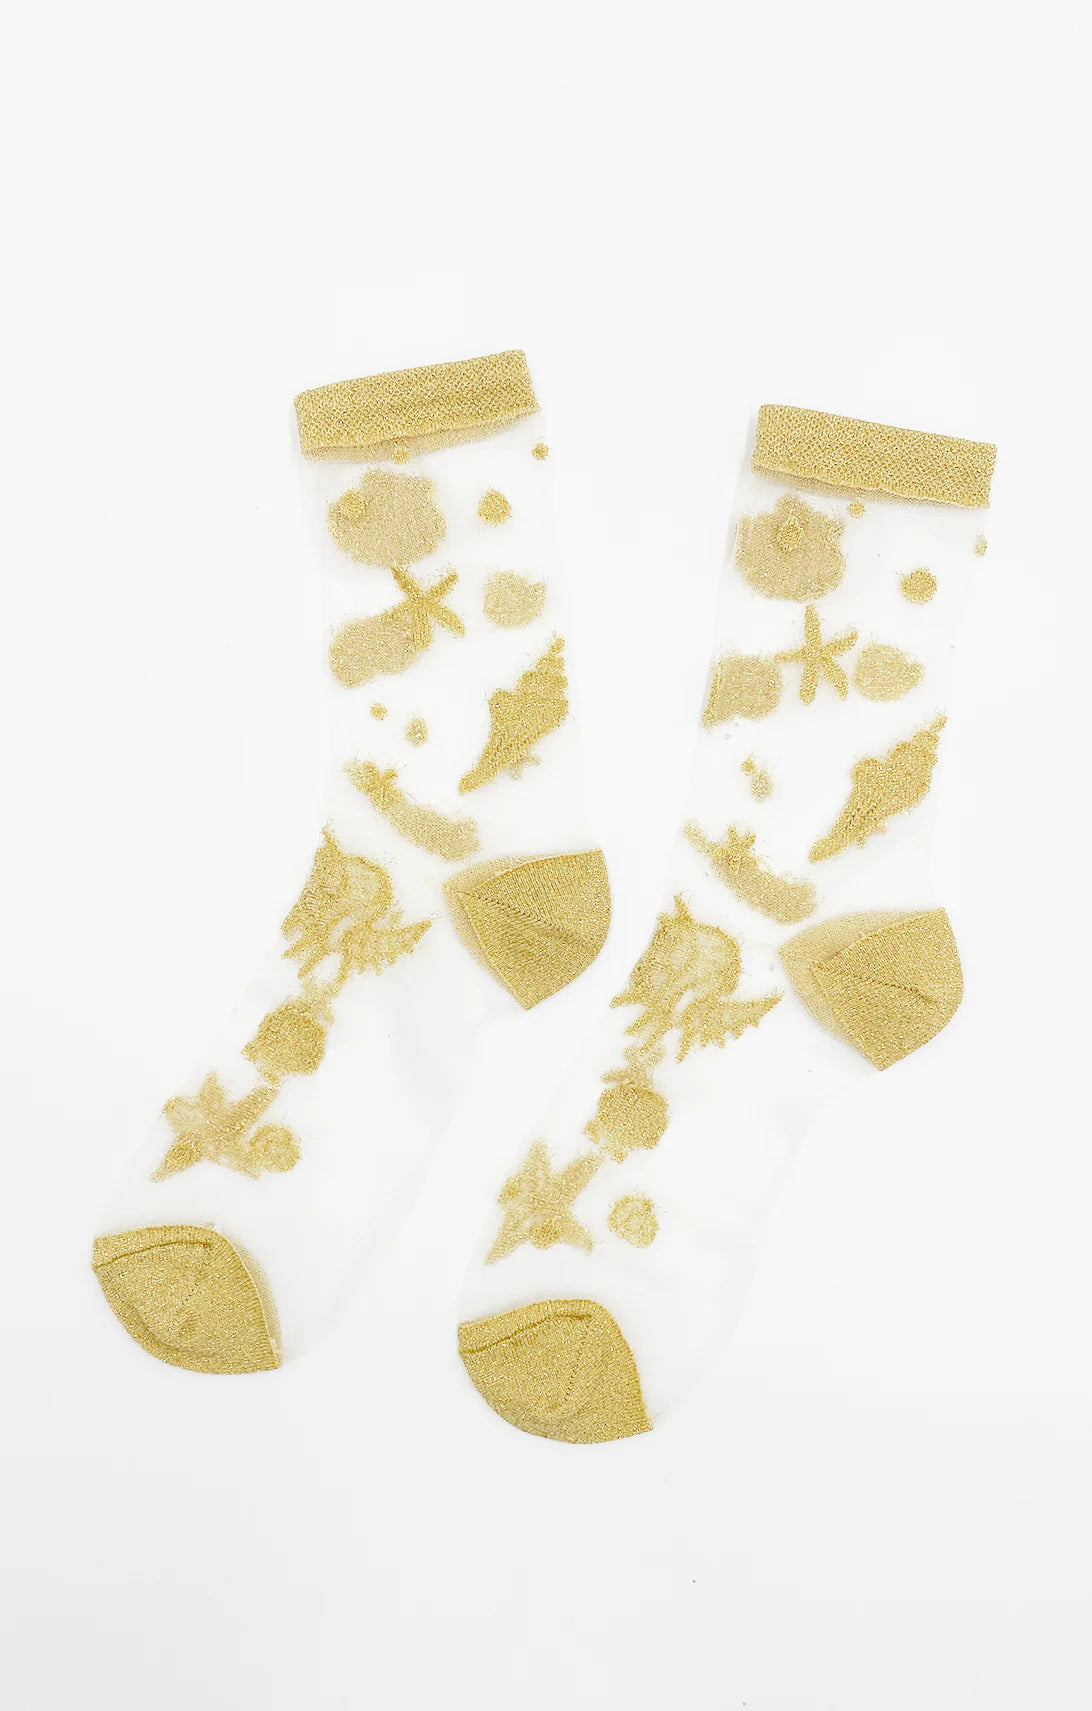 Tabbisocks' Shimmery Gold Seashell Clear Sheer Socks, which are GOLD SHIMMERY in color